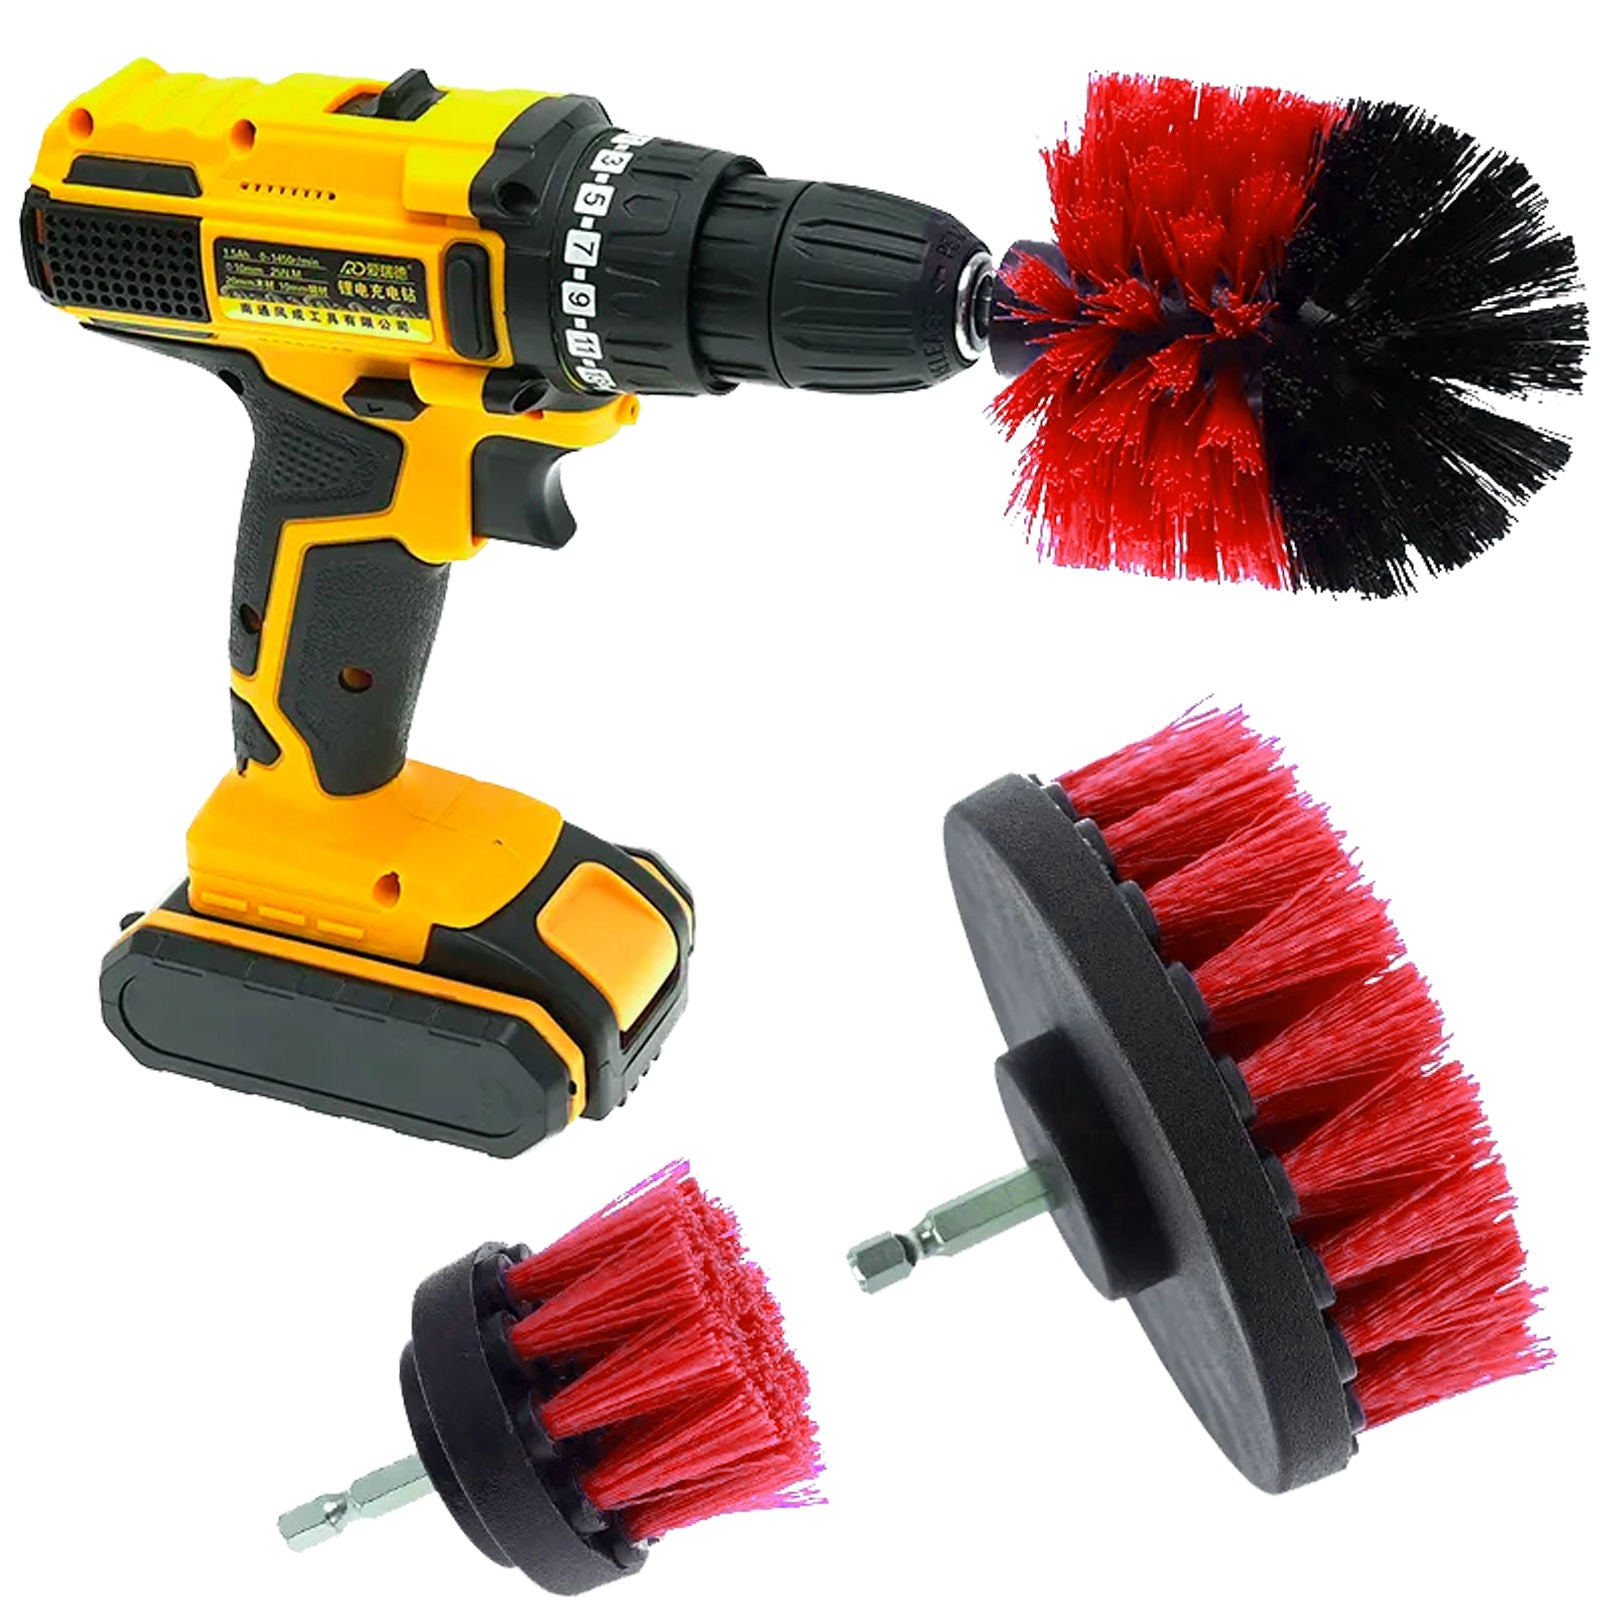 Three-Piece Electric Drill Set Bathroom Carpet Sink Cleaning Brush Head Red